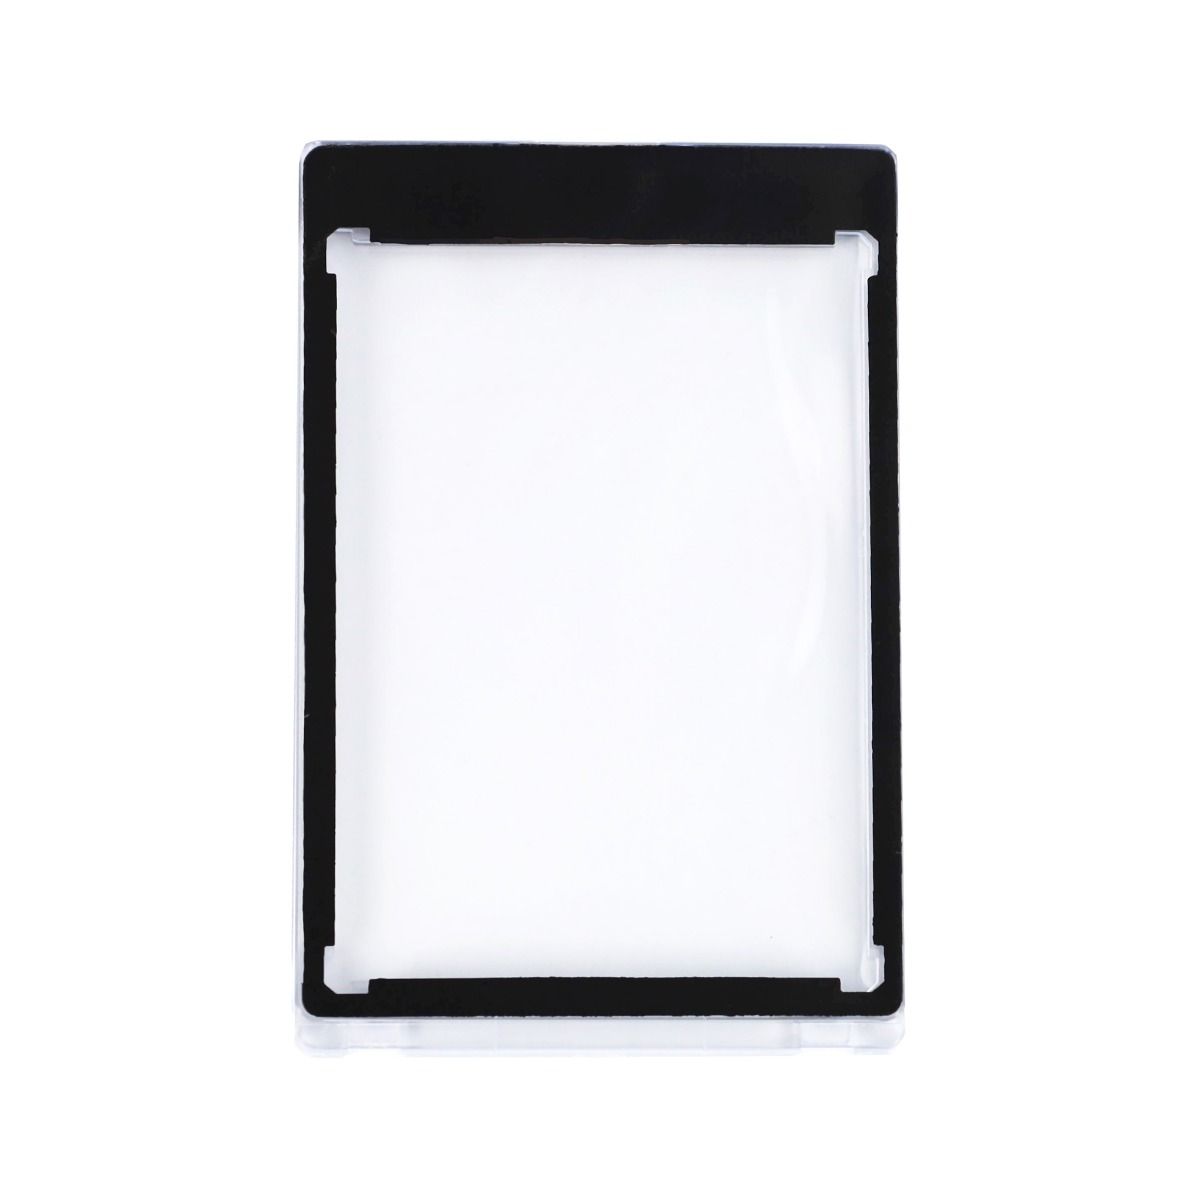 BCW Magnetic Card Holder - 35 PT (Black Border)-Loose-BCW Supplies-Ace Cards & Collectibles